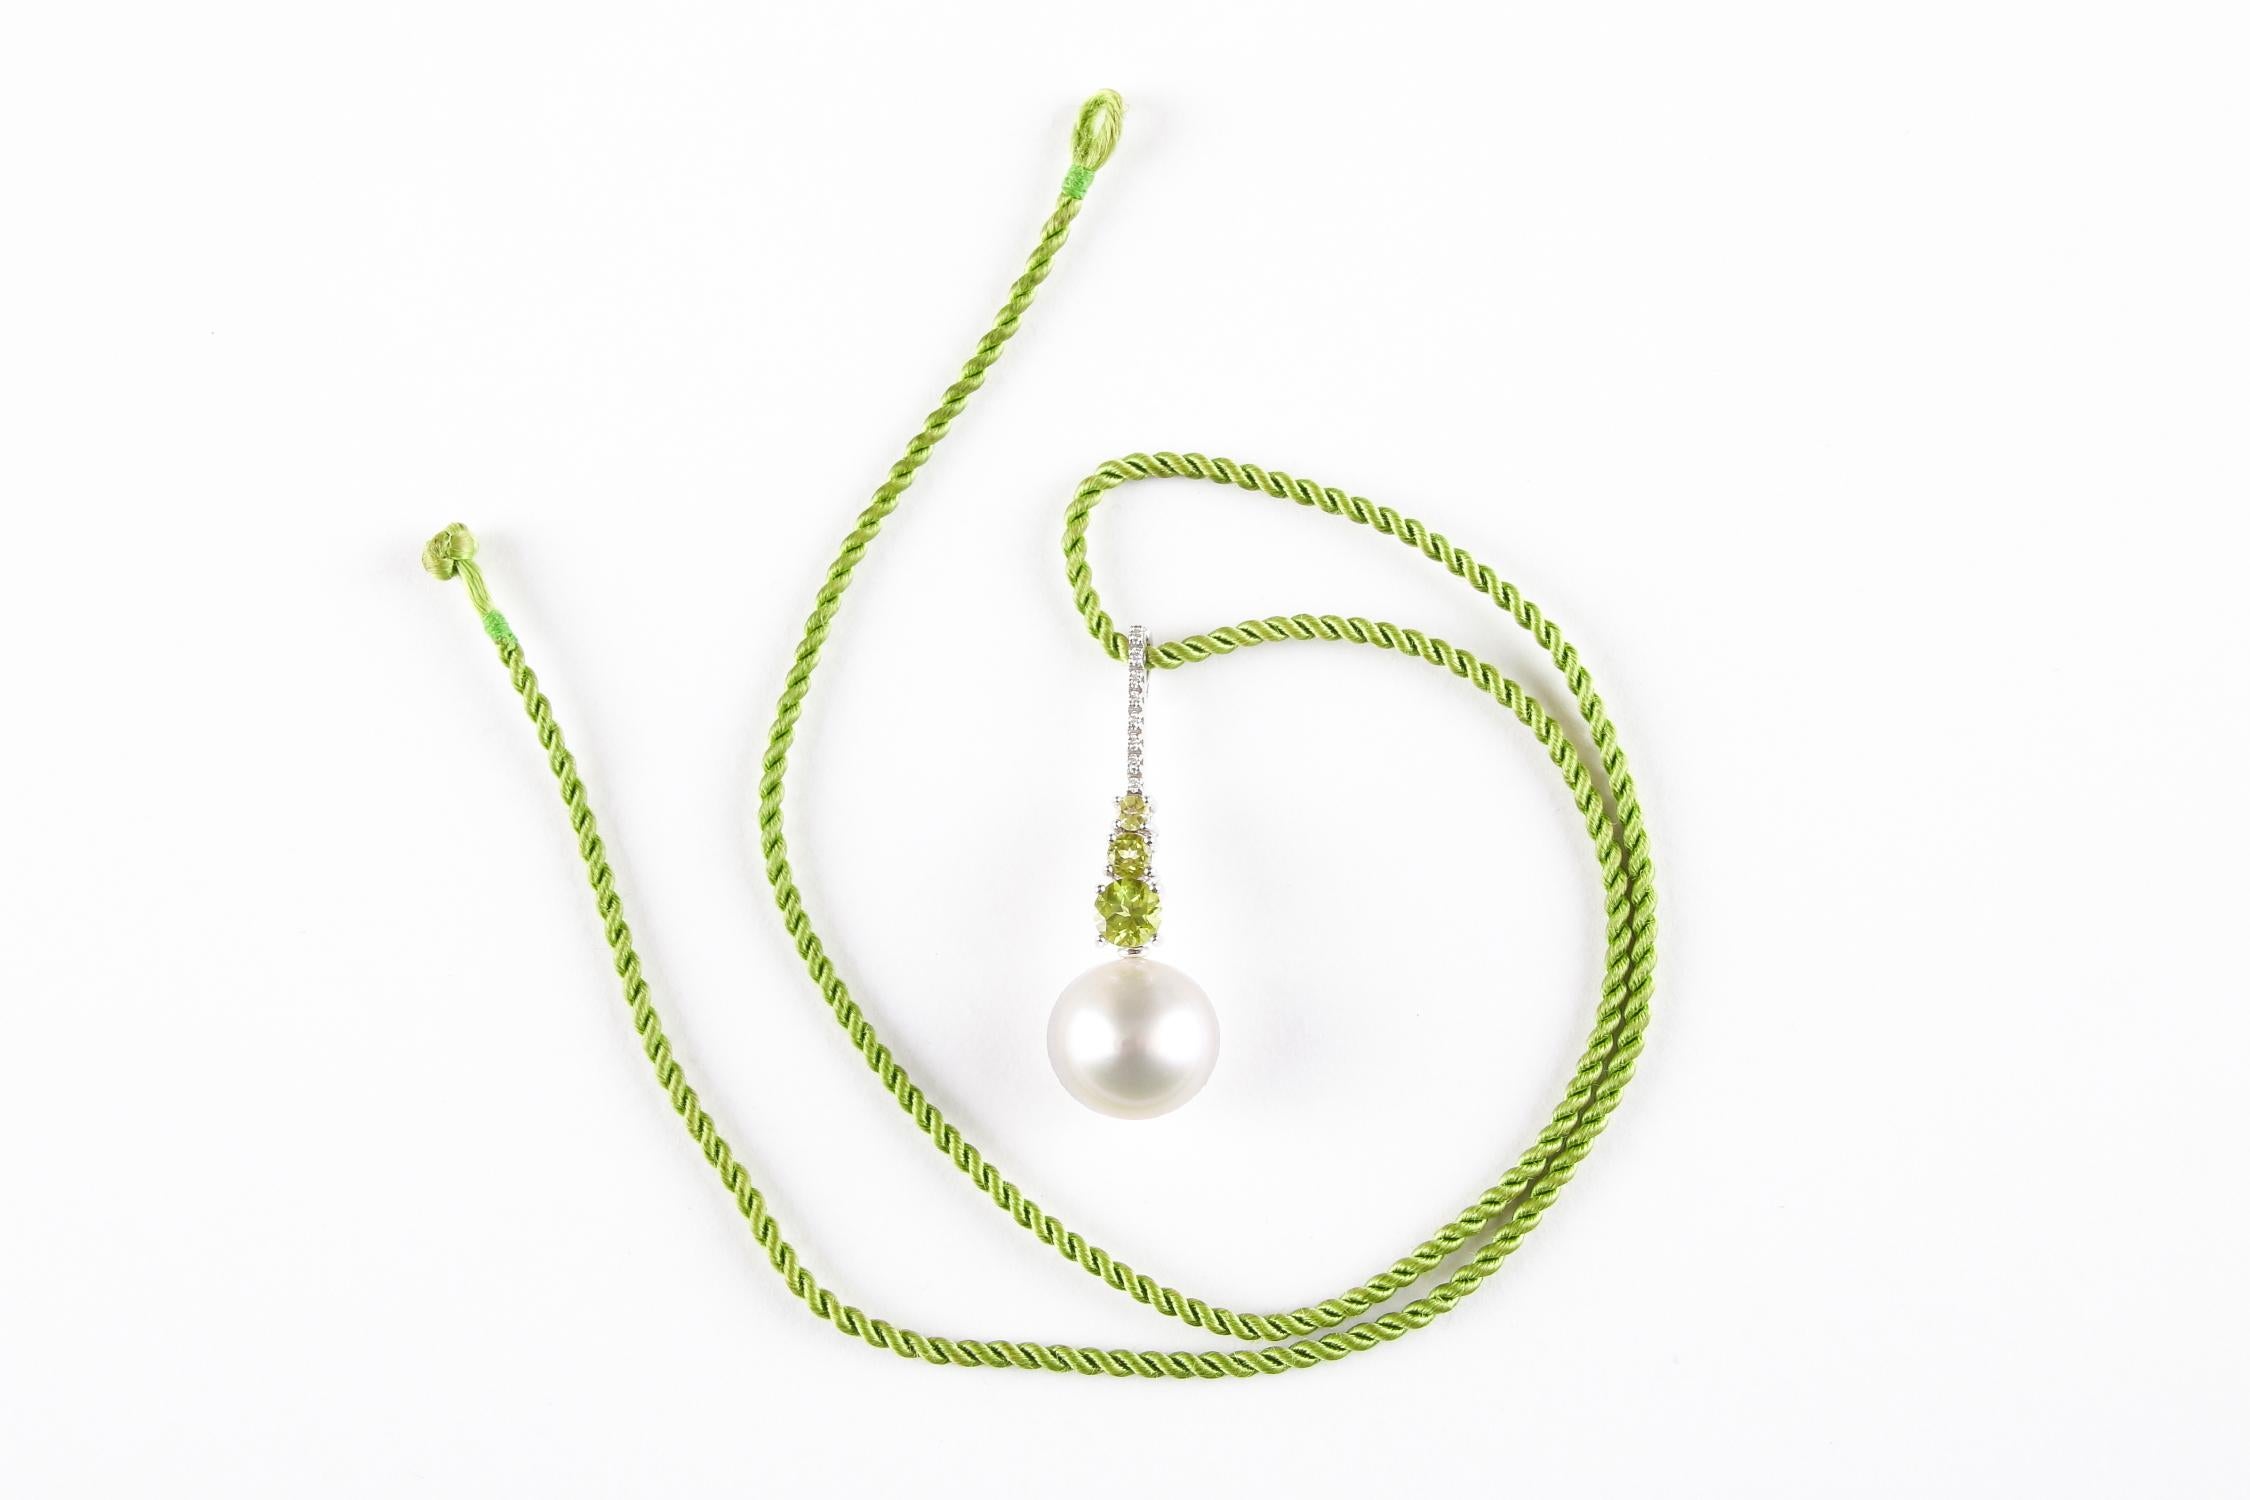 From the exclusive award winning Australian jewellers Autore, this is a really stunning pendant.

The pendant features a cultured South Sea pearl, measuring 14.1mm, suspended from a line of three graduated circular-shape peridots below a